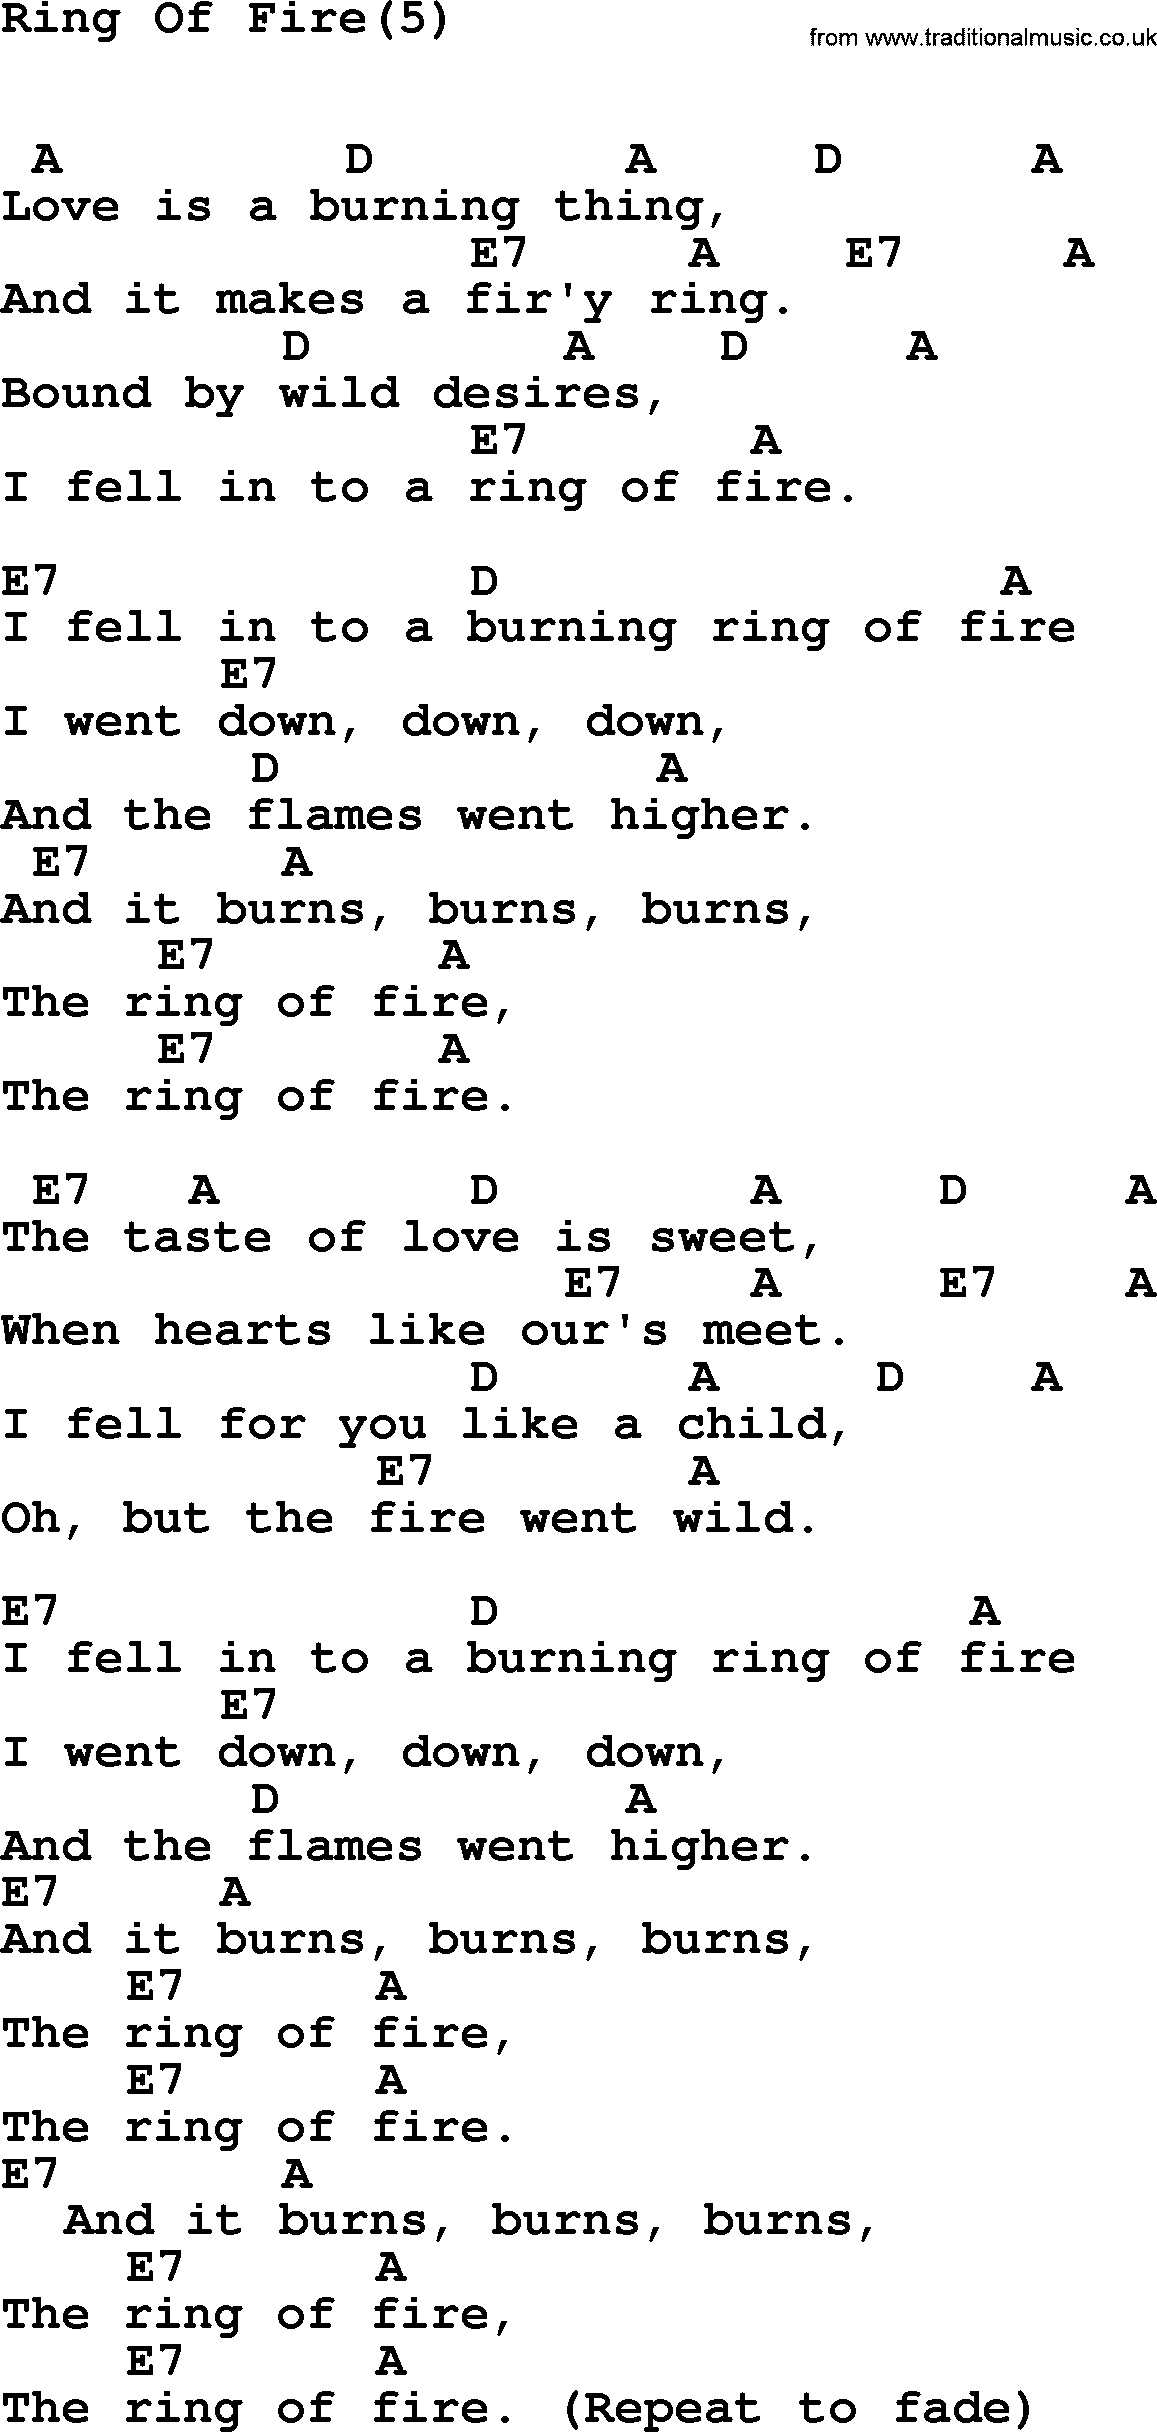 Johnny Cash song Ring Of Fire(5), lyrics and chords